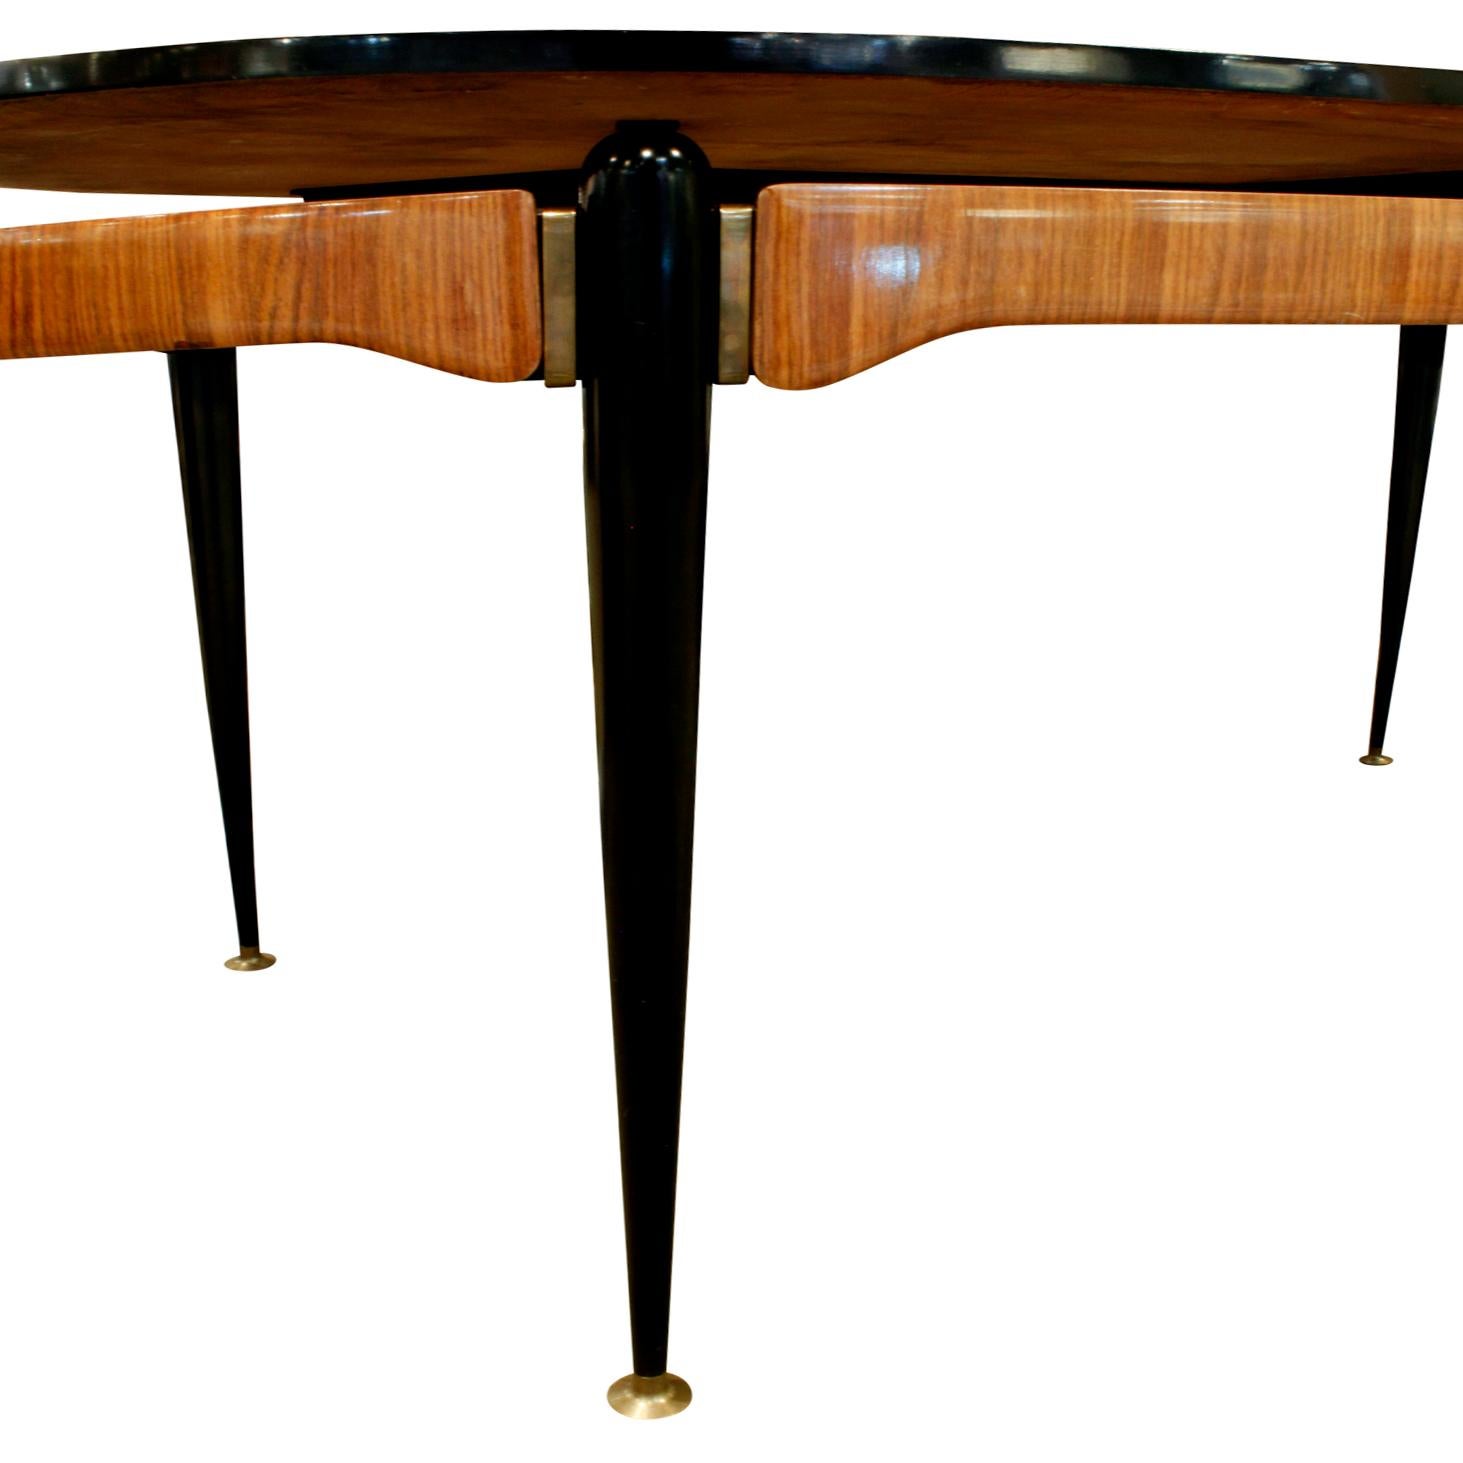 Hand-Crafted Beautiful Radiating Rosewood Dining Table, attributed to Ico Parisi, circa 1954 For Sale